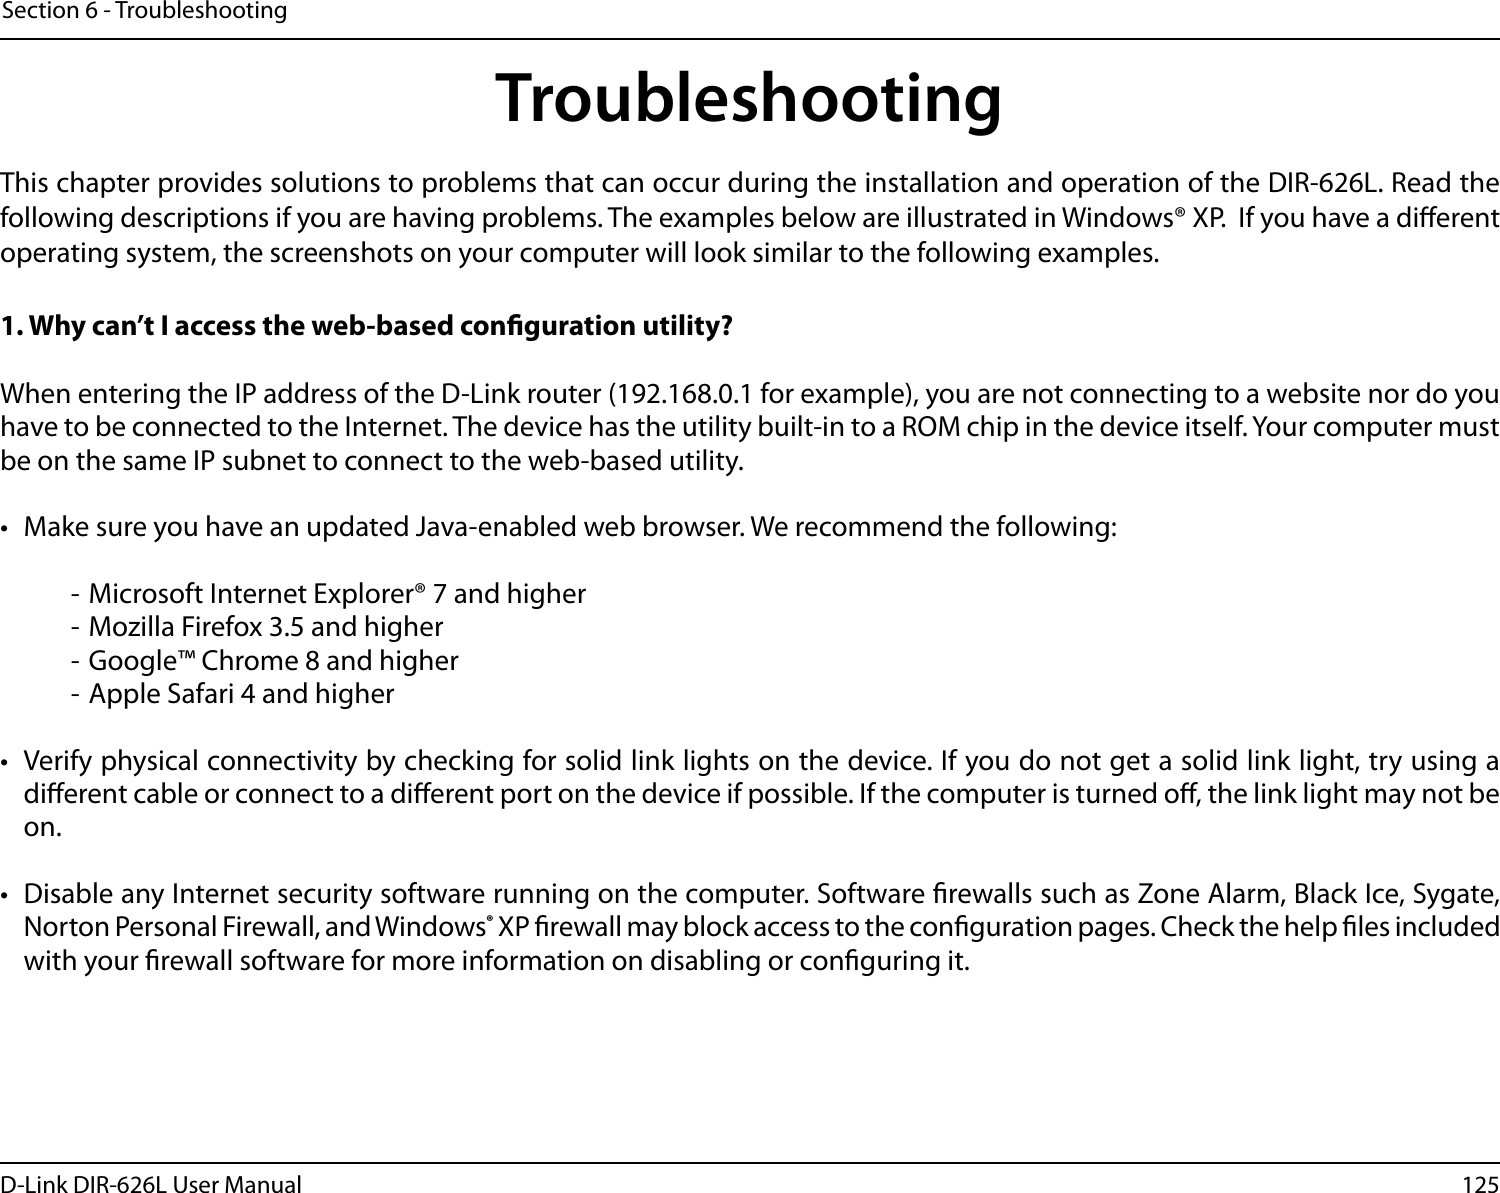 125D-Link DIR-626L User ManualSection 6 - TroubleshootingTroubleshootingThis chapter provides solutions to problems that can occur during the installation and operation of the DIR-626L. Read the following descriptions if you are having problems. The examples below are illustrated in Windows® XP.  If you have a dierent operating system, the screenshots on your computer will look similar to the following examples.1. Why can’t I access the web-based conguration utility?When entering the IP address of the D-Link router (192.168.0.1 for example), you are not connecting to a website nor do you have to be connected to the Internet. The device has the utility built-in to a ROM chip in the device itself. Your computer must be on the same IP subnet to connect to the web-based utility. •  Make sure you have an updated Java-enabled web browser. We recommend the following:  - Microsoft Internet Explorer® 7 and higher- Mozilla Firefox 3.5 and higher- Google™ Chrome 8 and higher- Apple Safari 4 and higher•  Verify physical connectivity by checking for solid link lights on the device. If you do not get a solid link light, try using a dierent cable or connect to a dierent port on the device if possible. If the computer is turned o, the link light may not be on.•  Disable any Internet security software running on the computer. Software rewalls such as Zone Alarm, Black Ice, Sygate, Norton Personal Firewall, and Windows® XP rewall may block access to the conguration pages. Check the help les included with your rewall software for more information on disabling or conguring it.